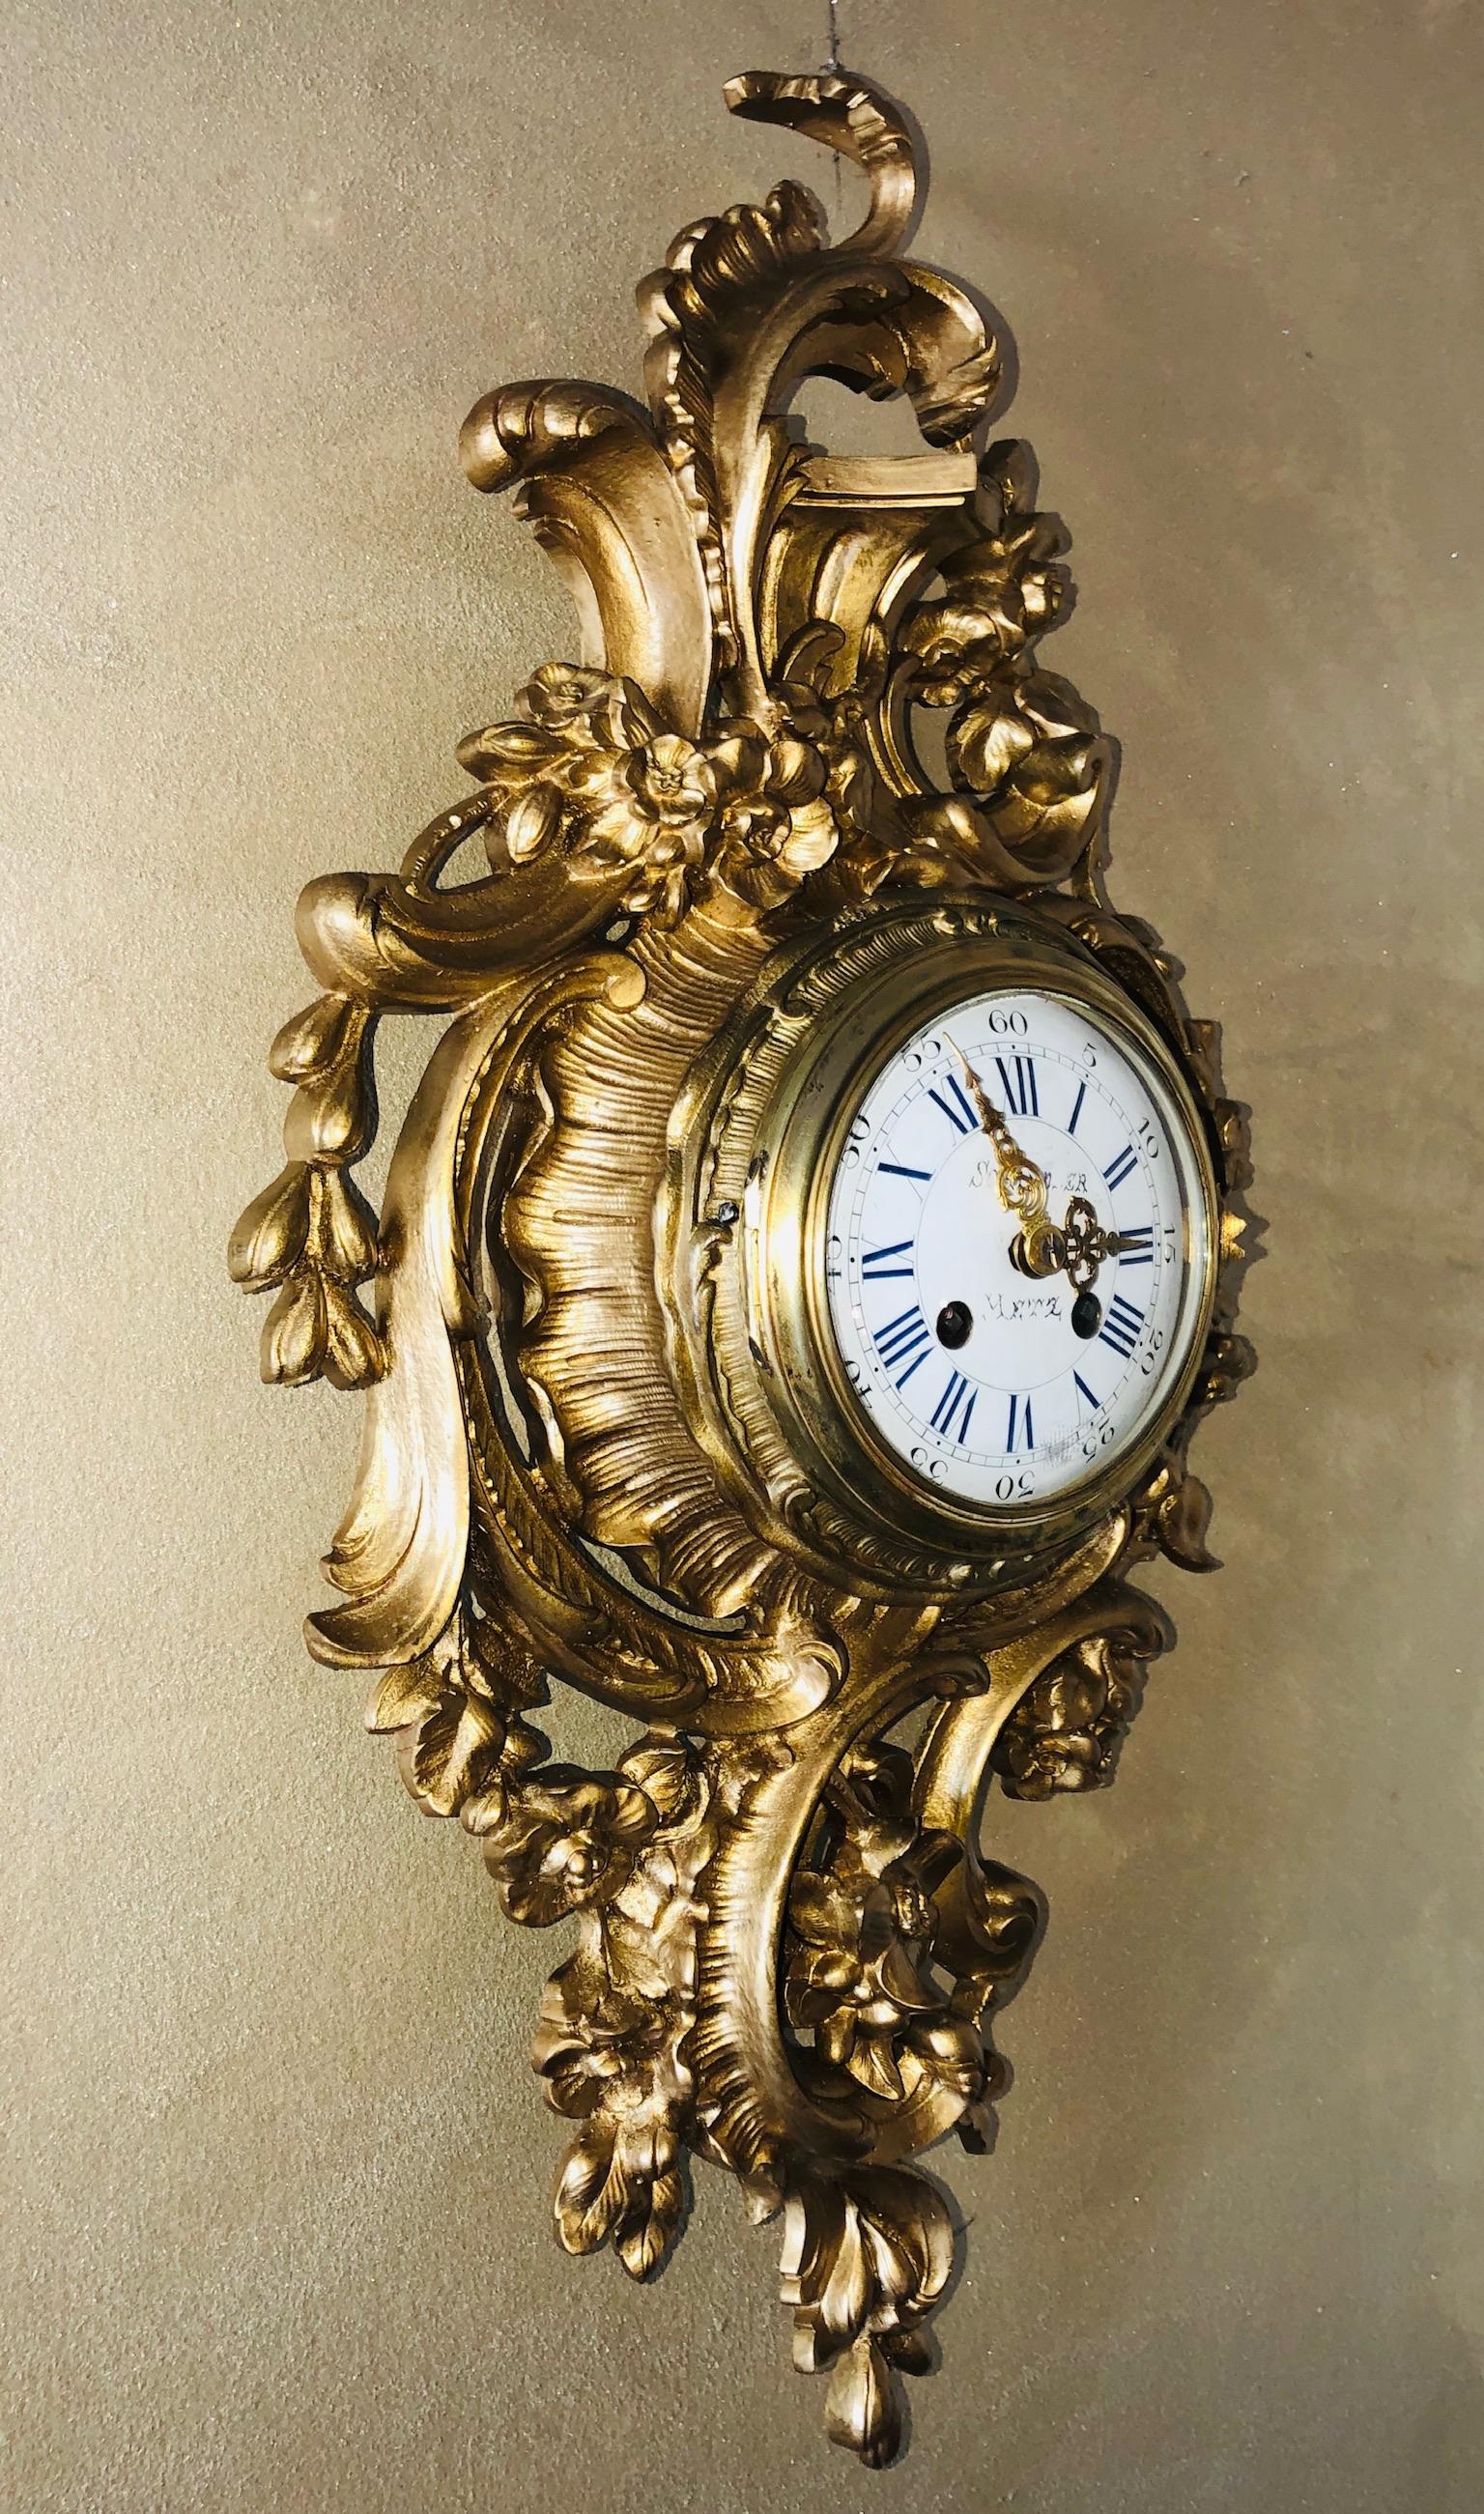 This is a mid-19th century cartel, or wall clock, is in the style of Louis XV with a lovely feather and floral motif as well as the traditional swirls and curves of the Rococo style. The movement was made by the Japy Bros. Co. of Paris France, circa